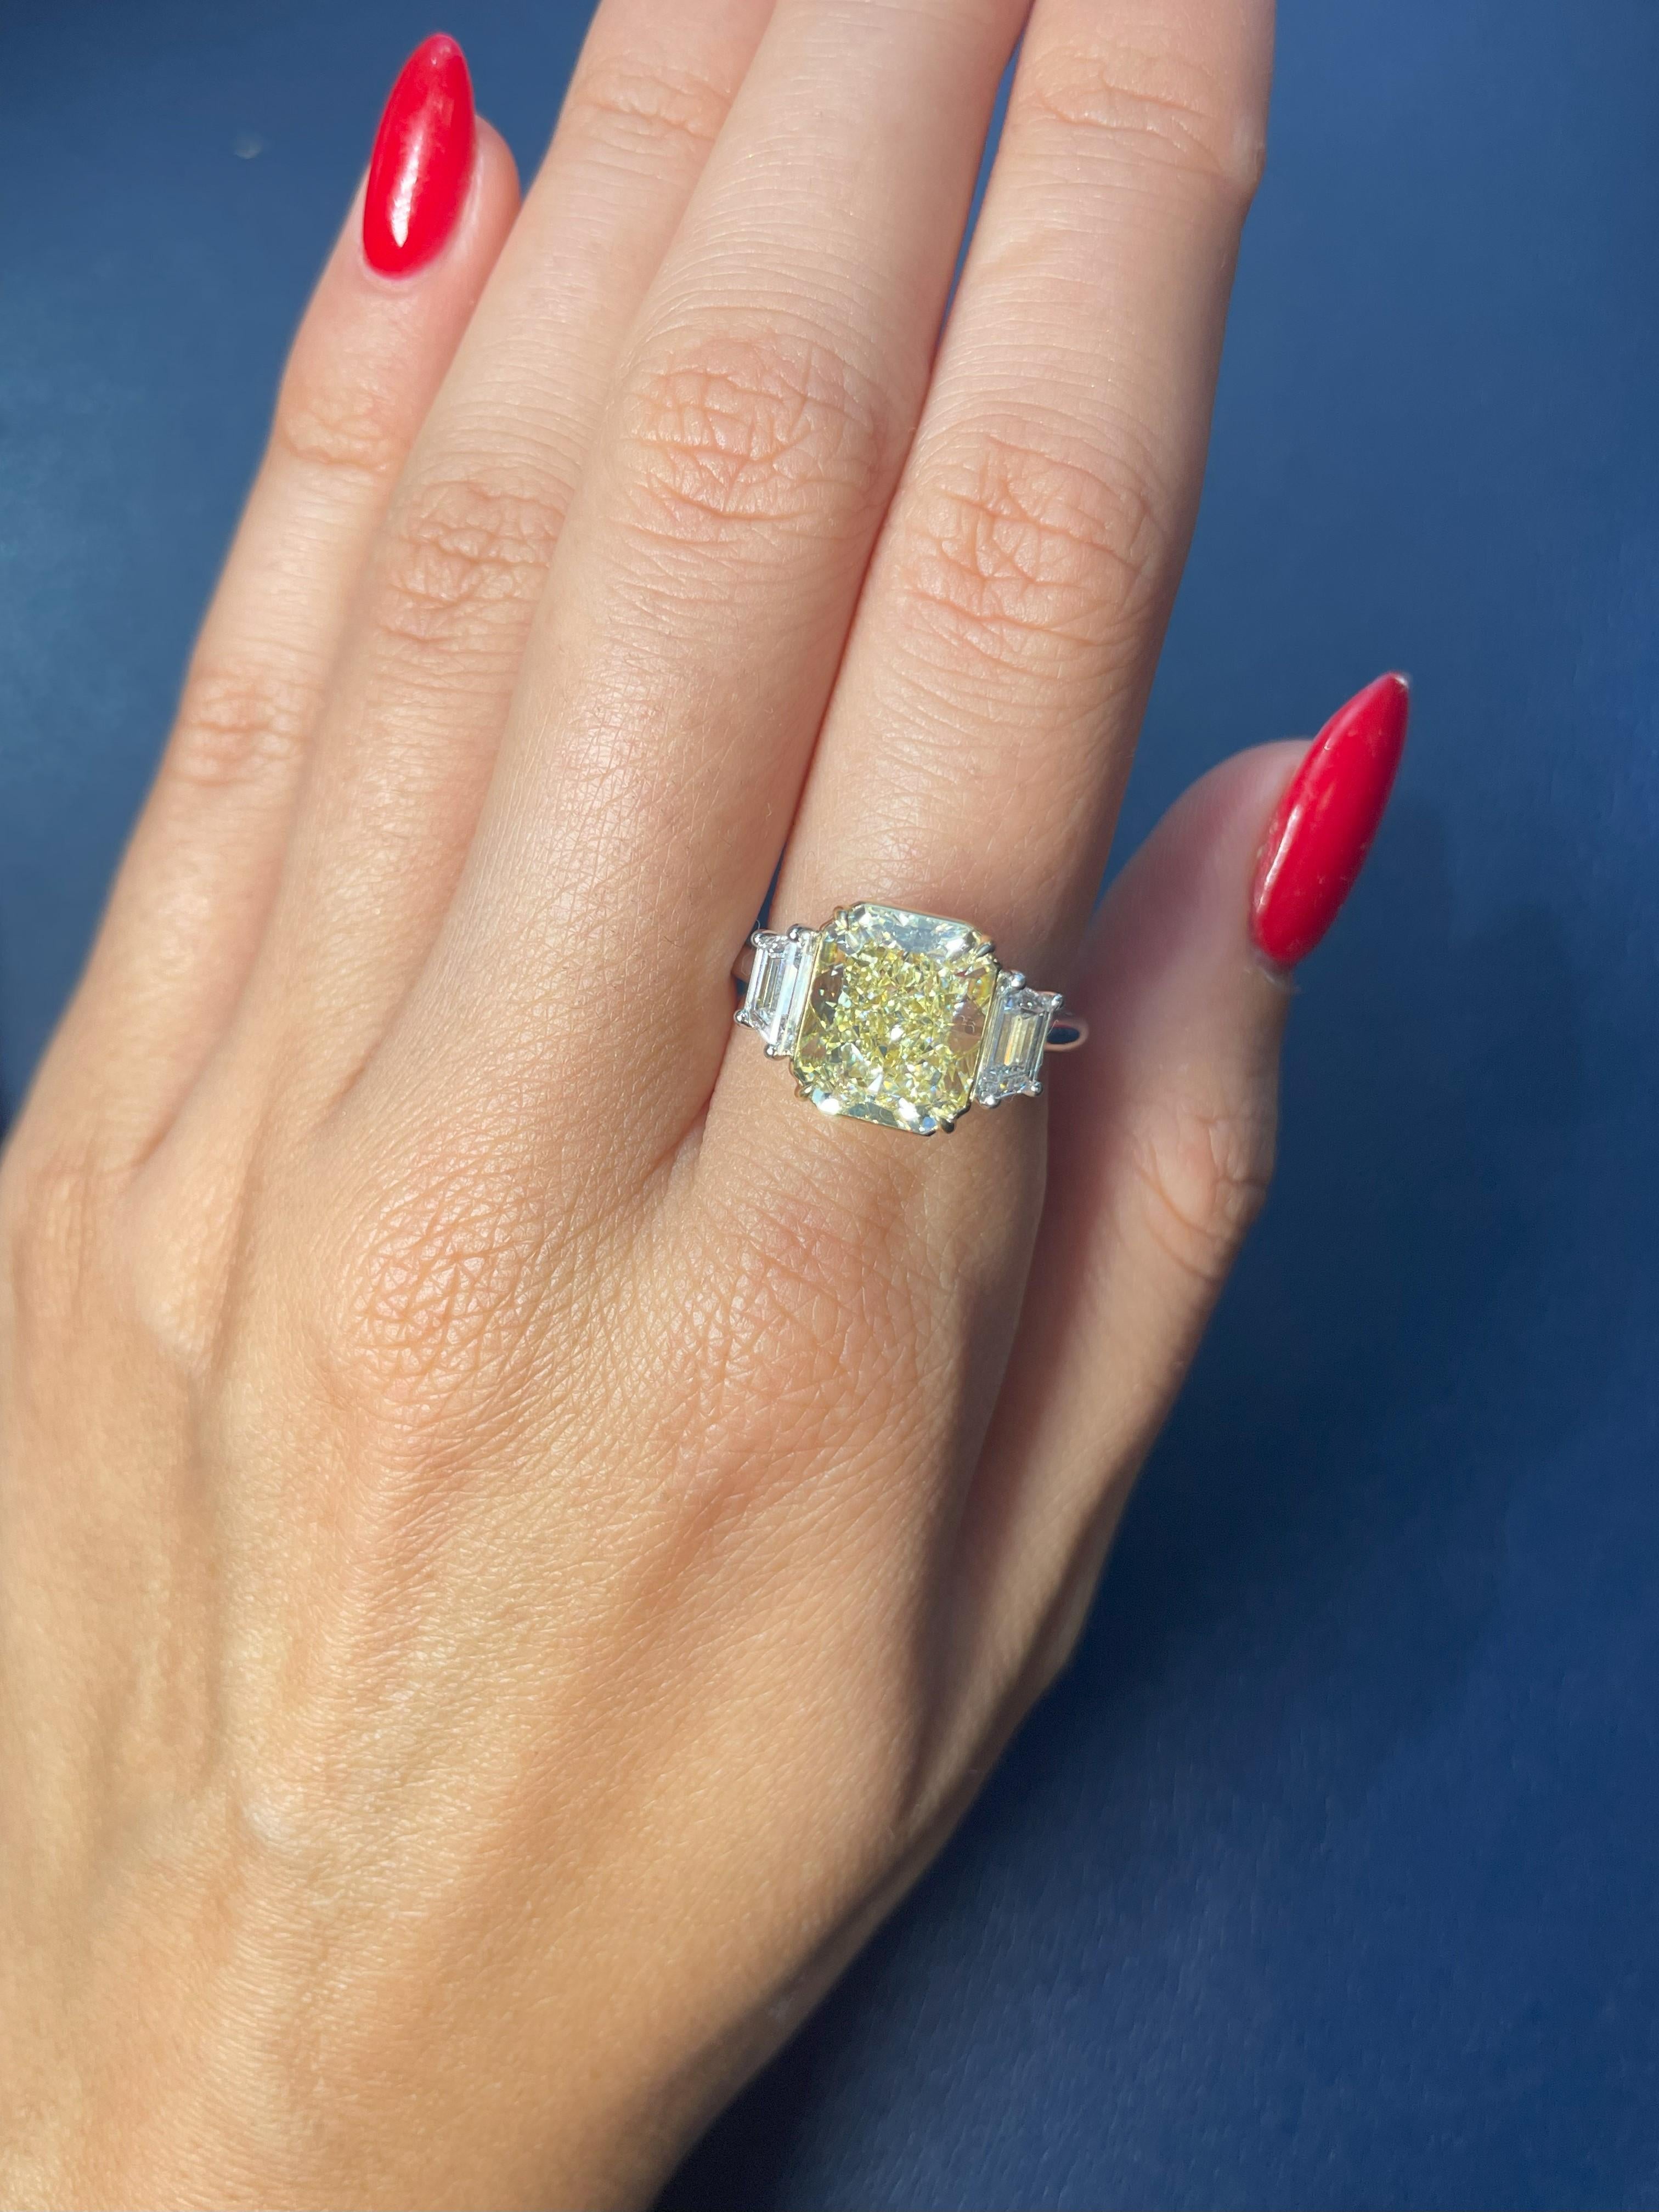 Exquisite Three-Stone Engagement Ring featuring a breathtaking 5.00-carat Fancy Light Yellow, Radiant-cut diamond. This diamond has been certified by GIA as Internally Flawless, highlighting its exceptional clarity. The center diamond is elegantly